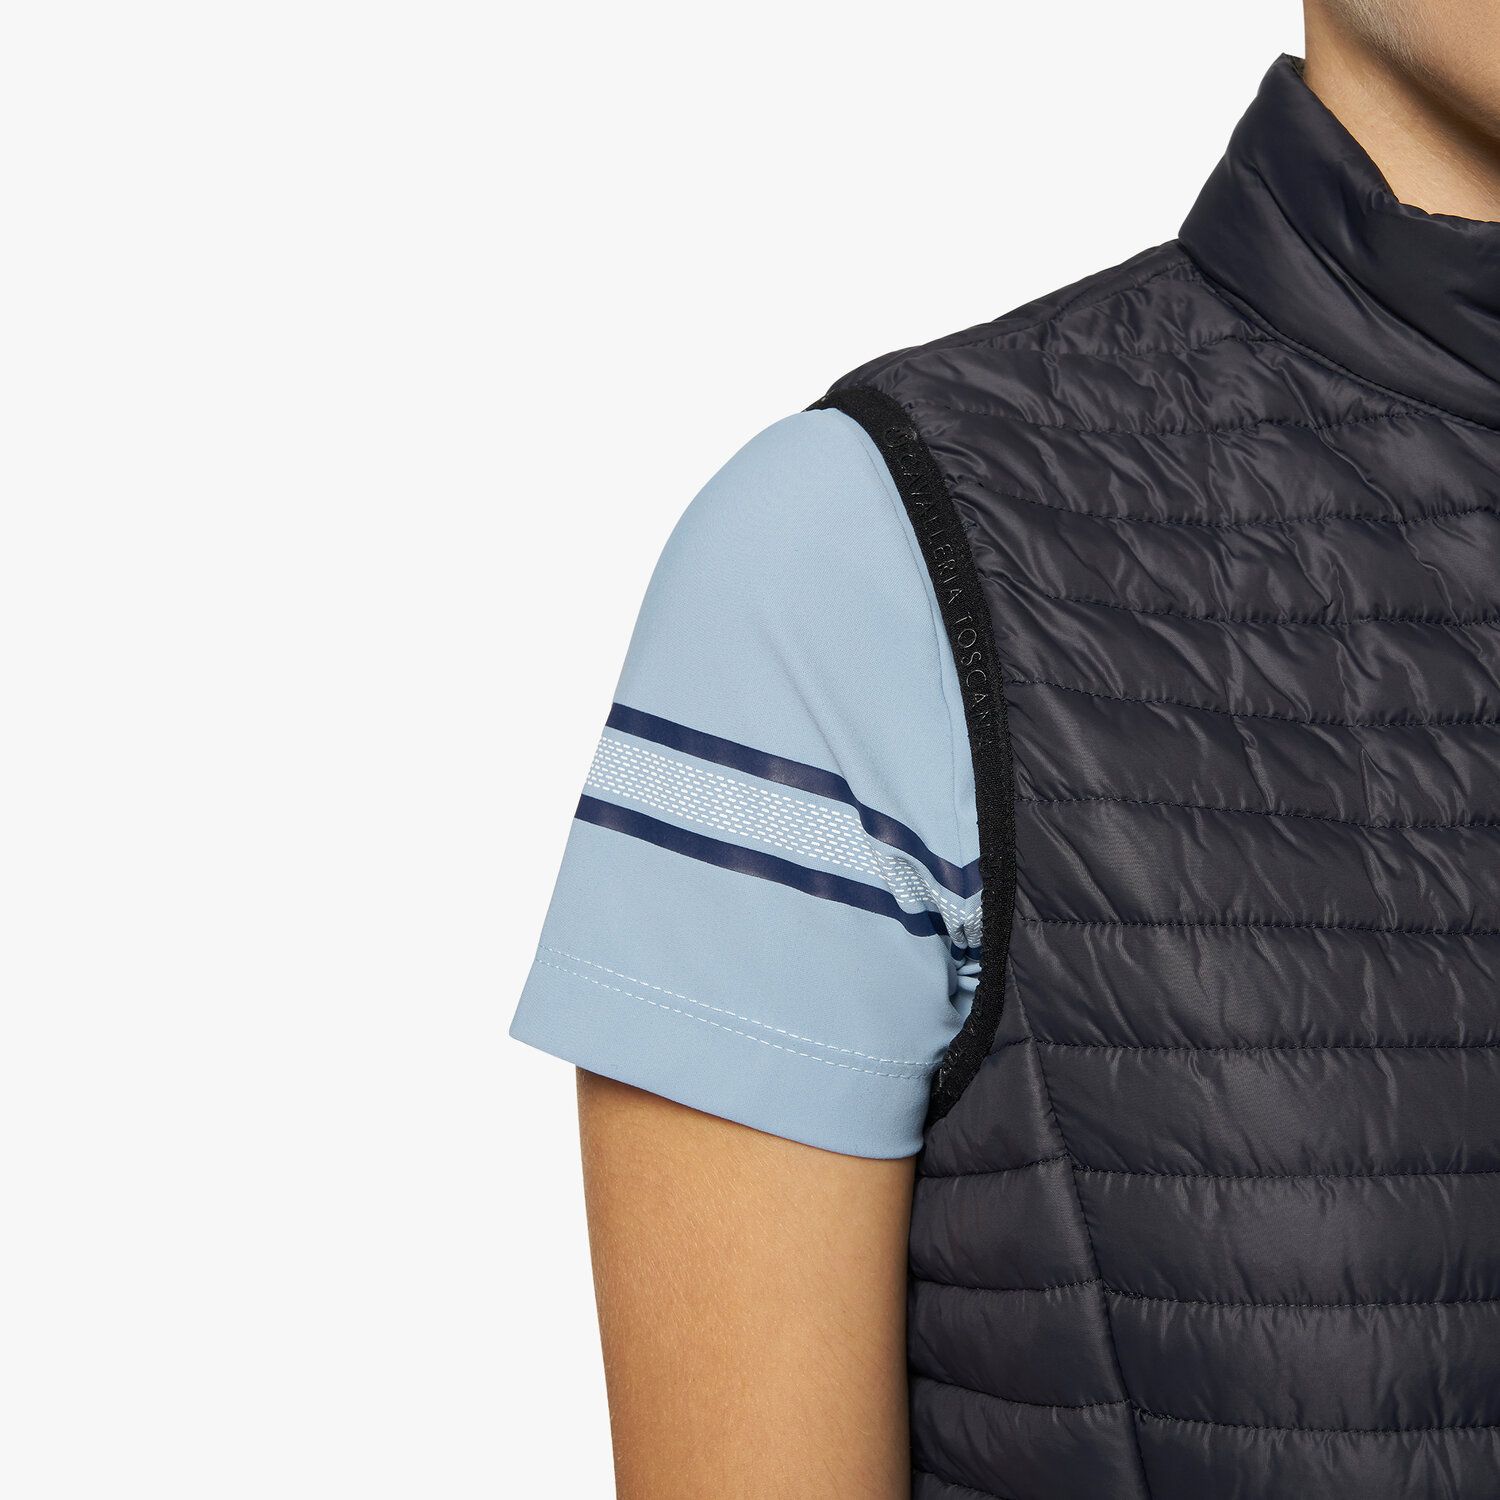    Jersey Quilted w/ Nylon Inser CAVALLERIA TOSCANA ()